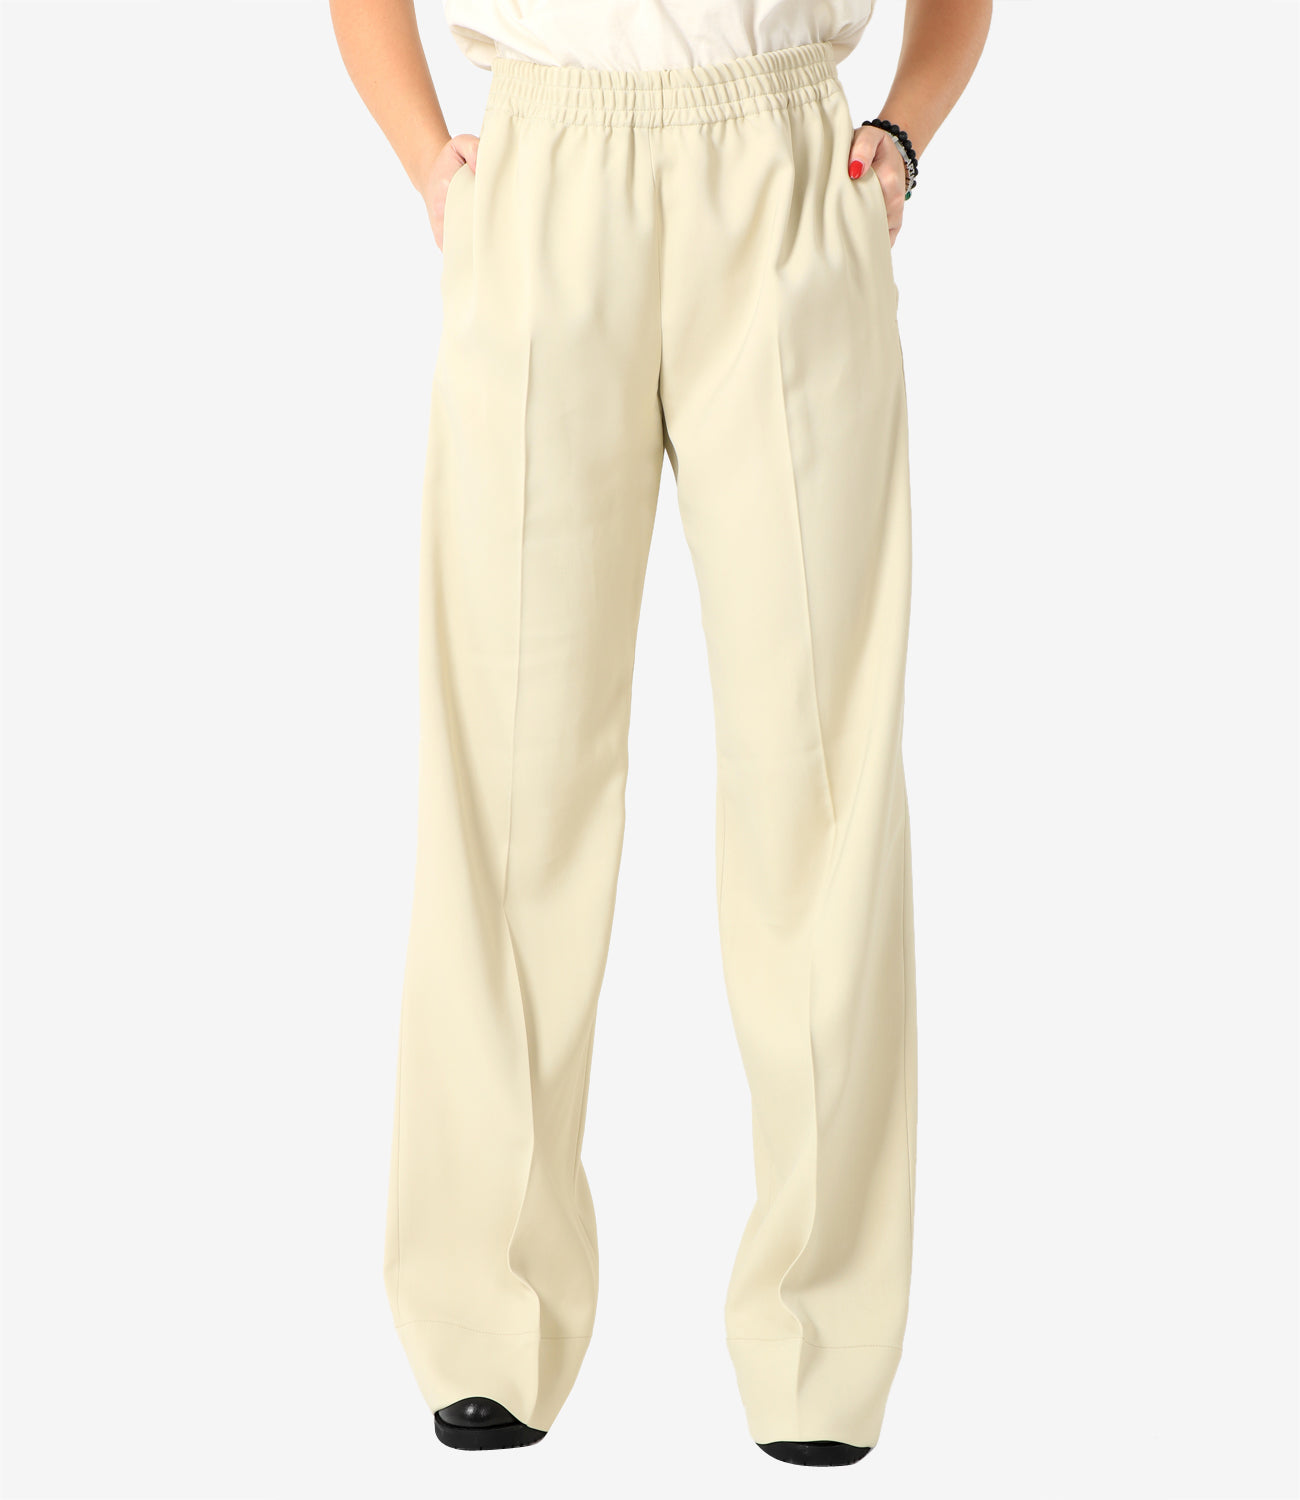 Brittany Cream Trousers